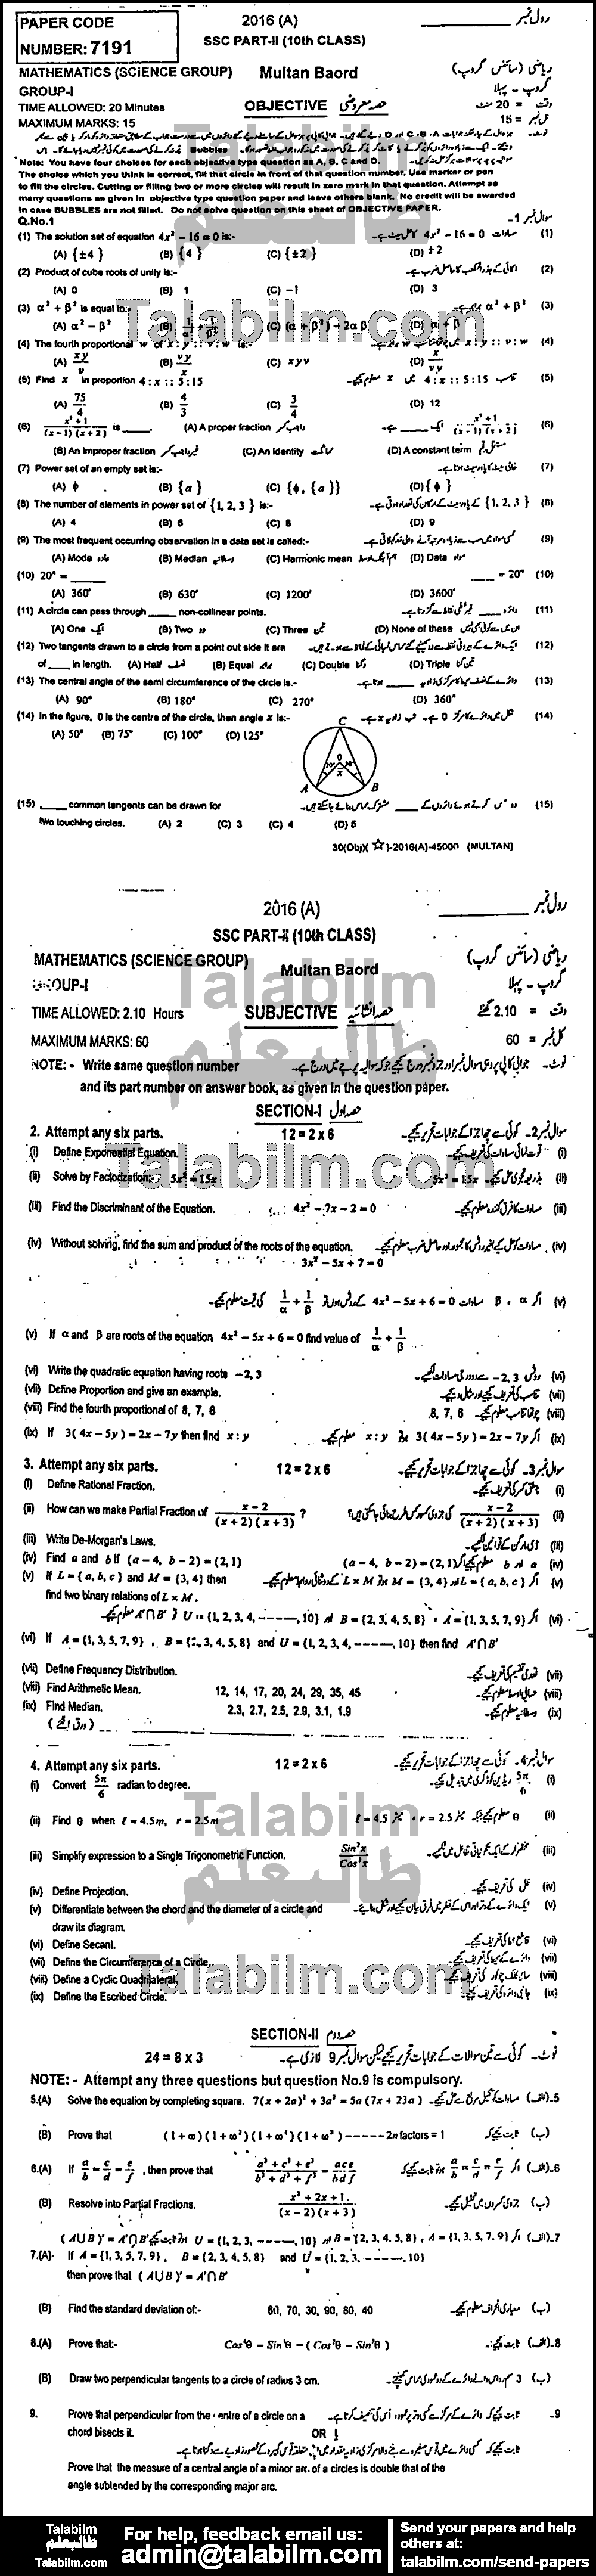 Math 0 past paper for 2016 Group-I